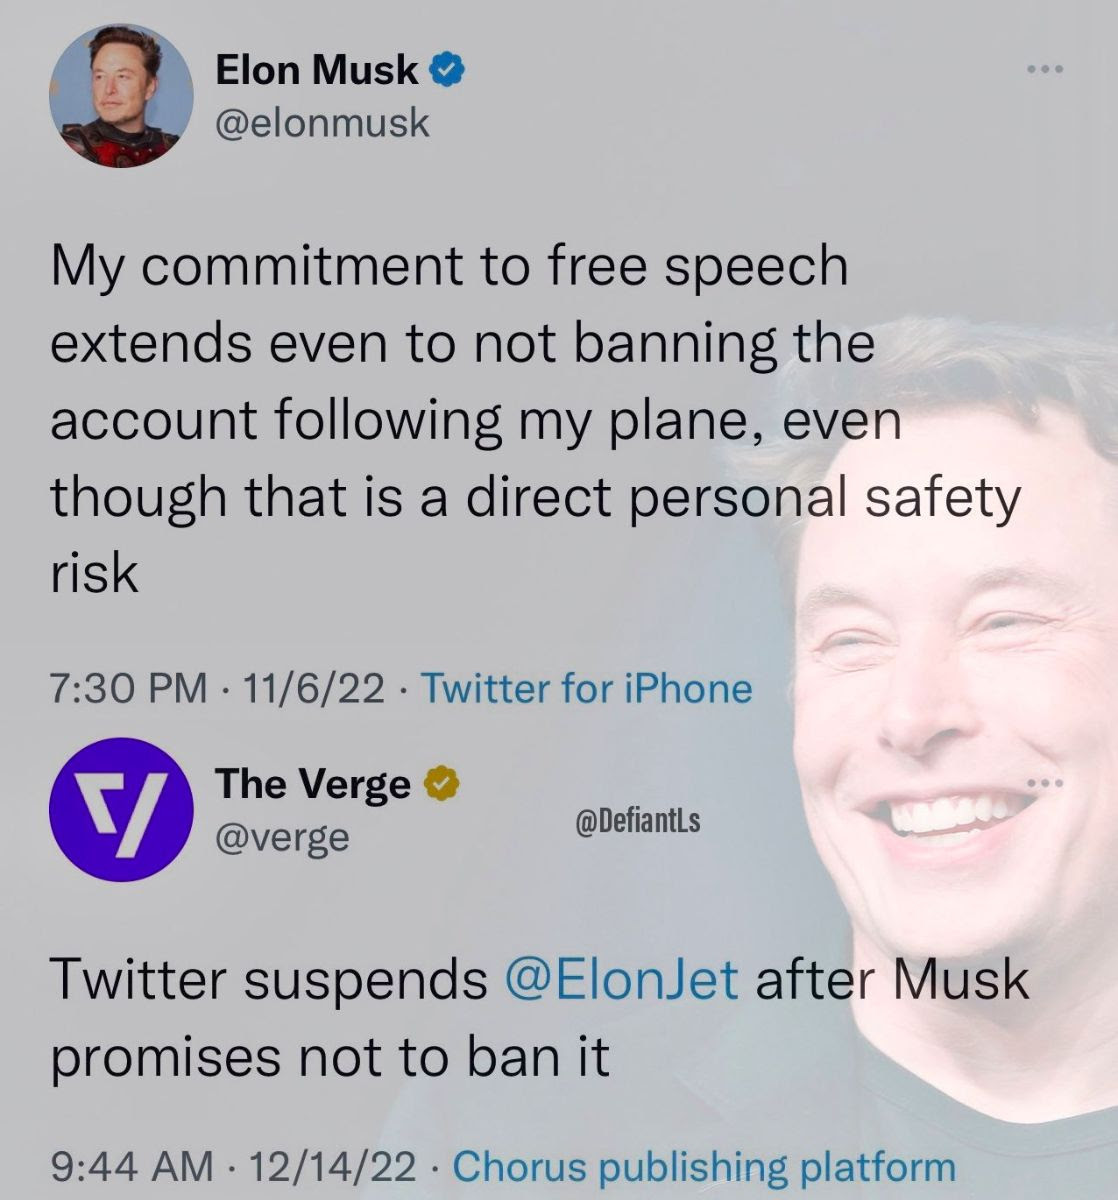 Hypocrite: Elon Mush. He tweets about free speech in one tweet, then bans someone he said he would not ban off Twitter.